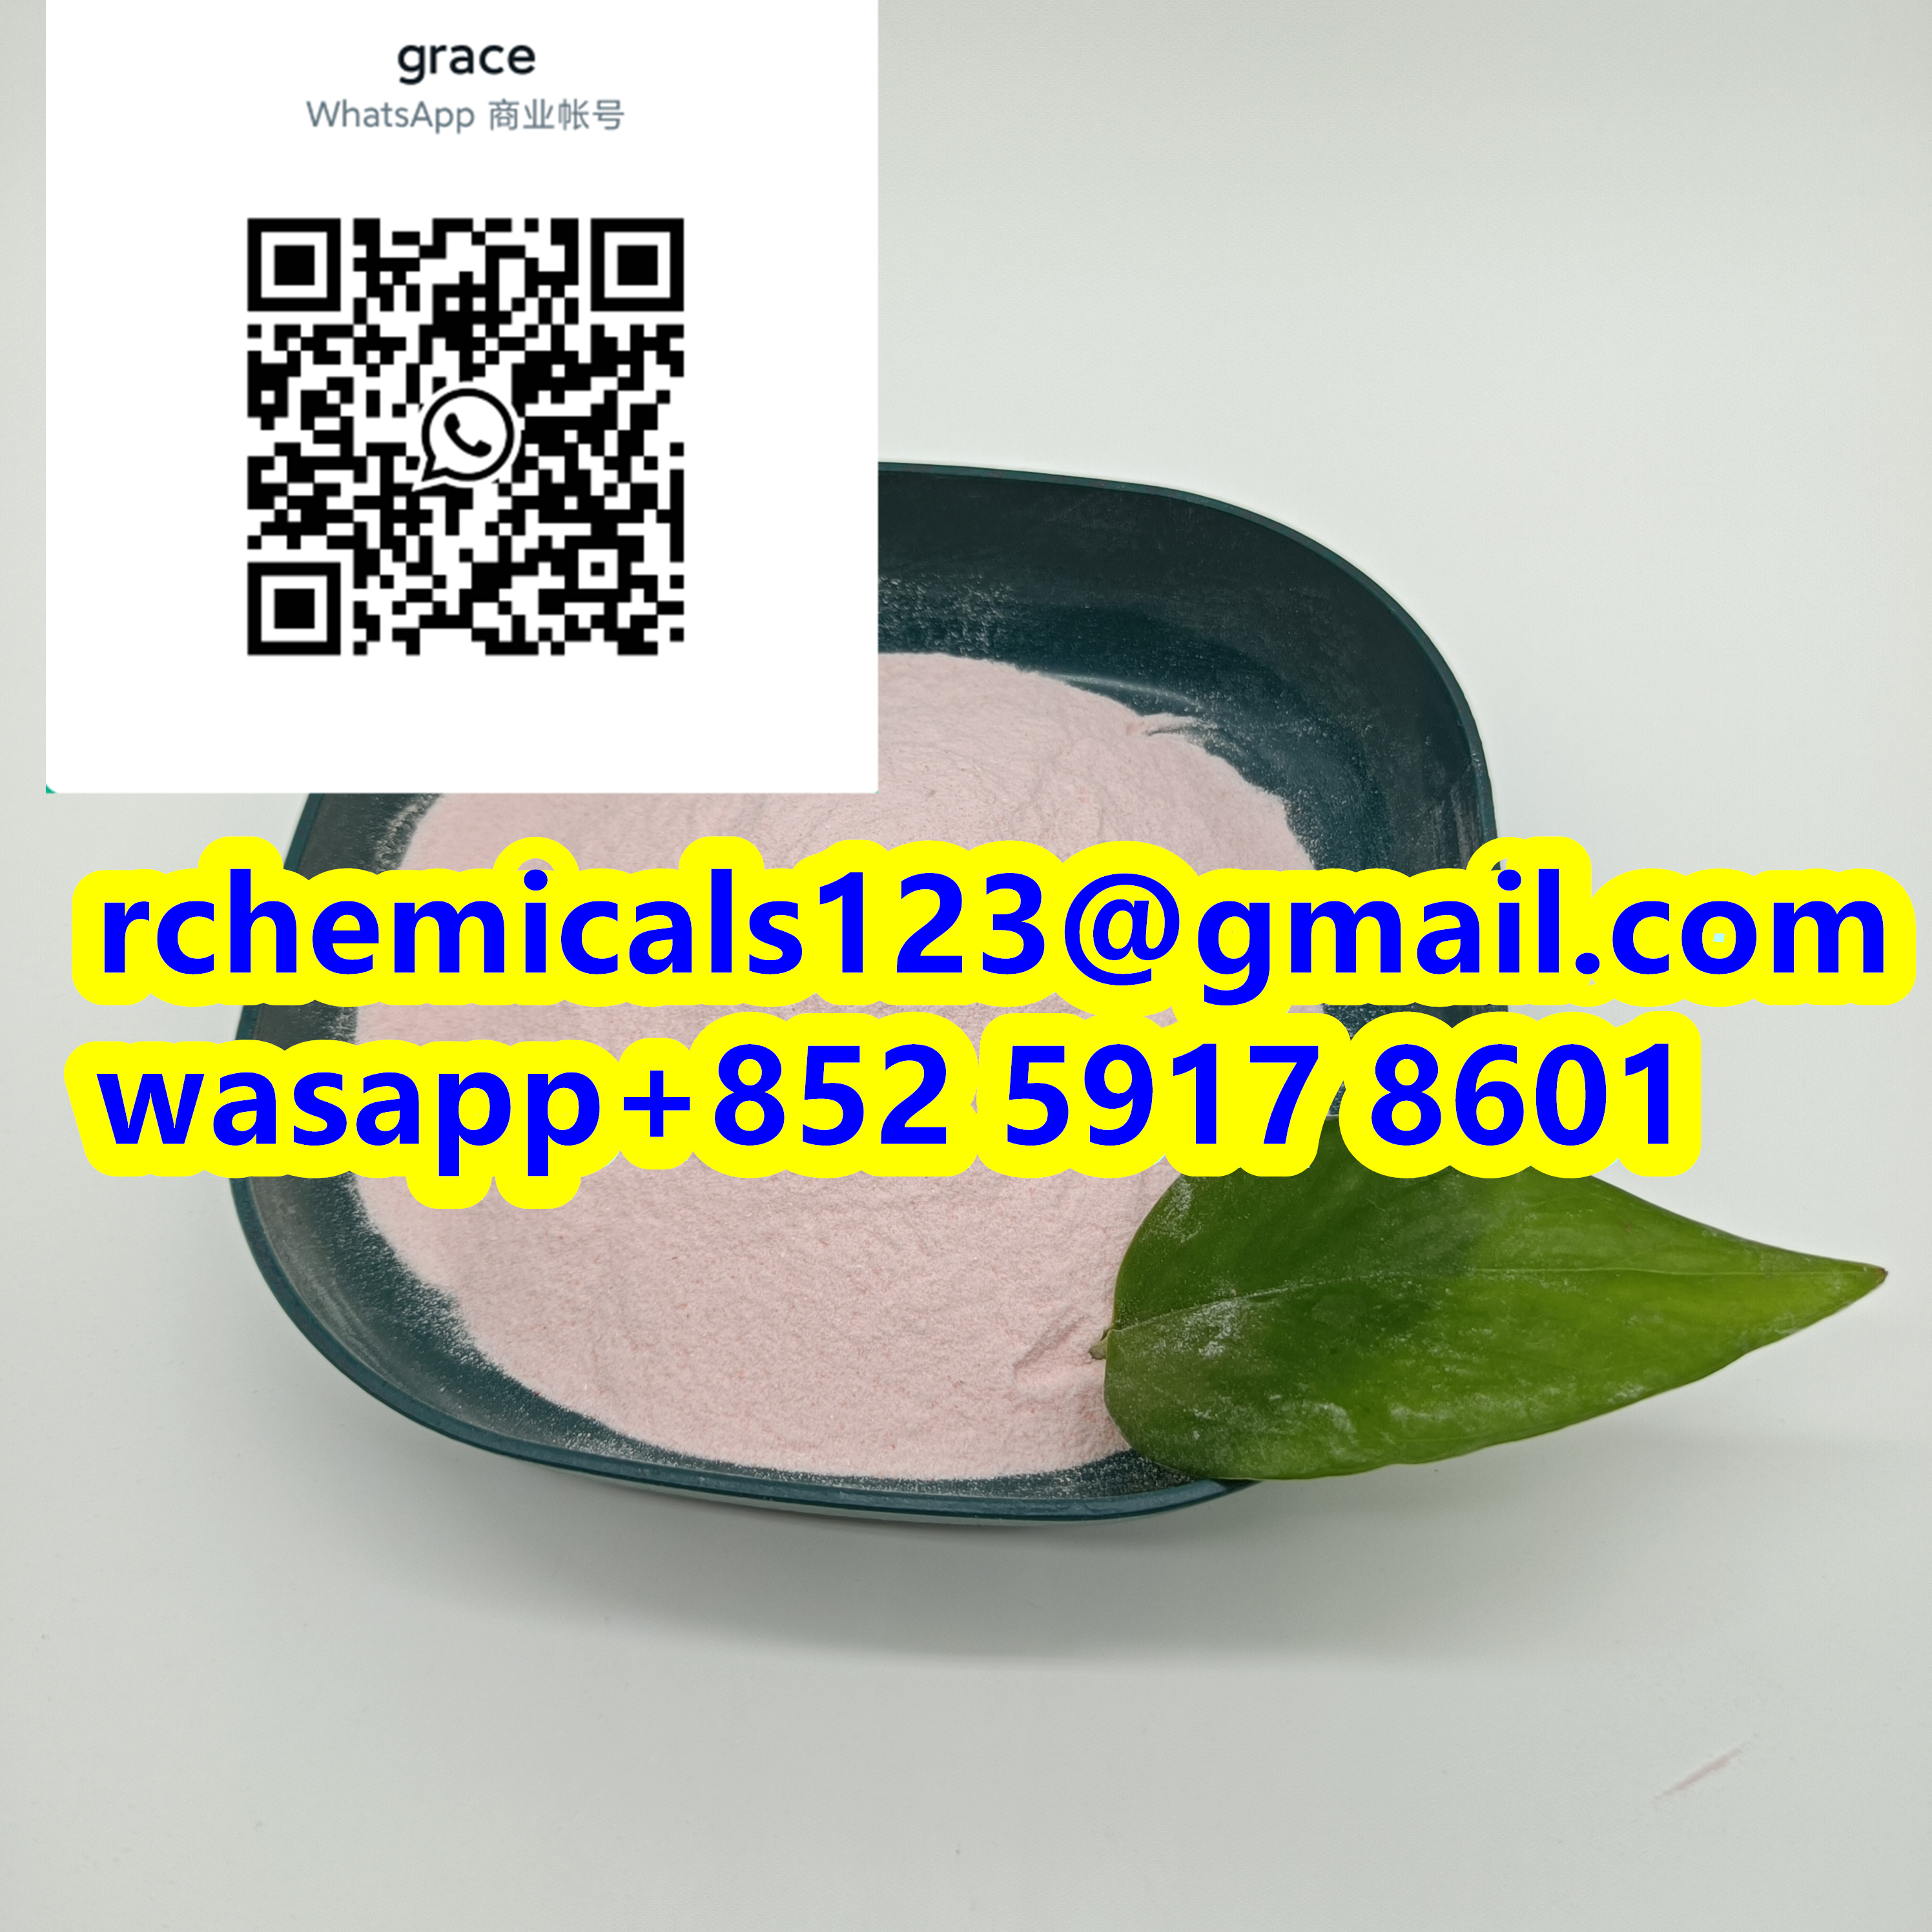 Bromazolam CAS 71368-80-4 (wasapp+852 5917 8601),hk,Services,Free Classifieds,Post Free Ads,77traders.com